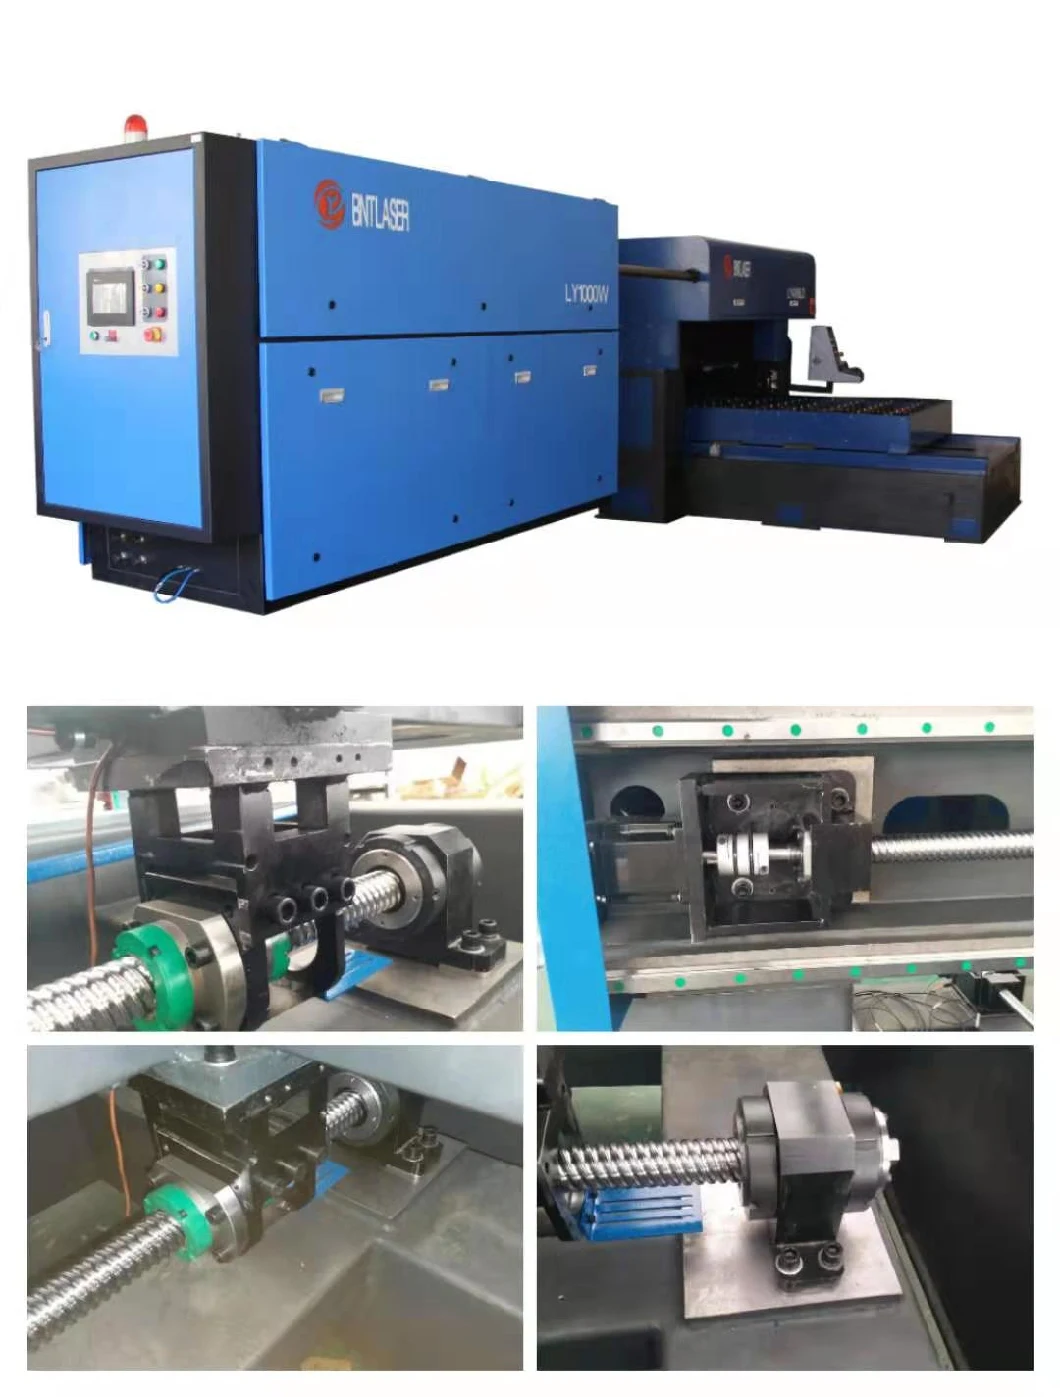 CO2 Laser Cutting Equipment Cutting Machine Machinery for Carton Design, Packaging, Printing Die Making Industries